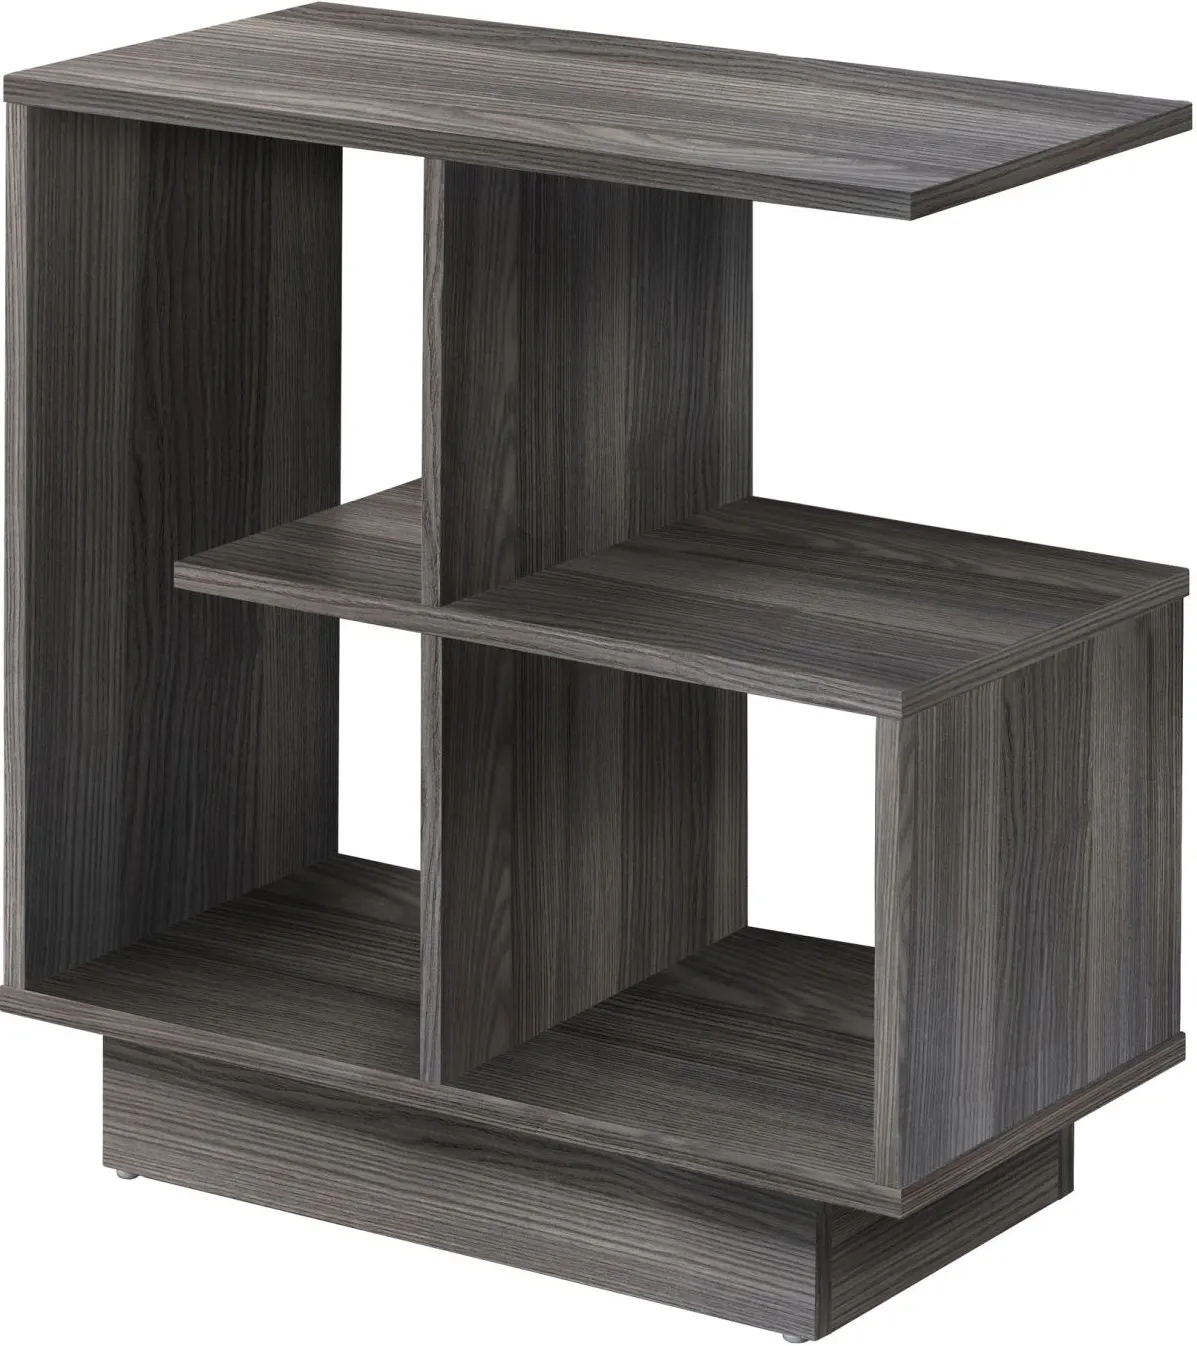 Accent Table, Side, End, Narrow, Small, 3 Tier, Living Room, Bedroom, Laminate, Grey, Contemporary, Modern